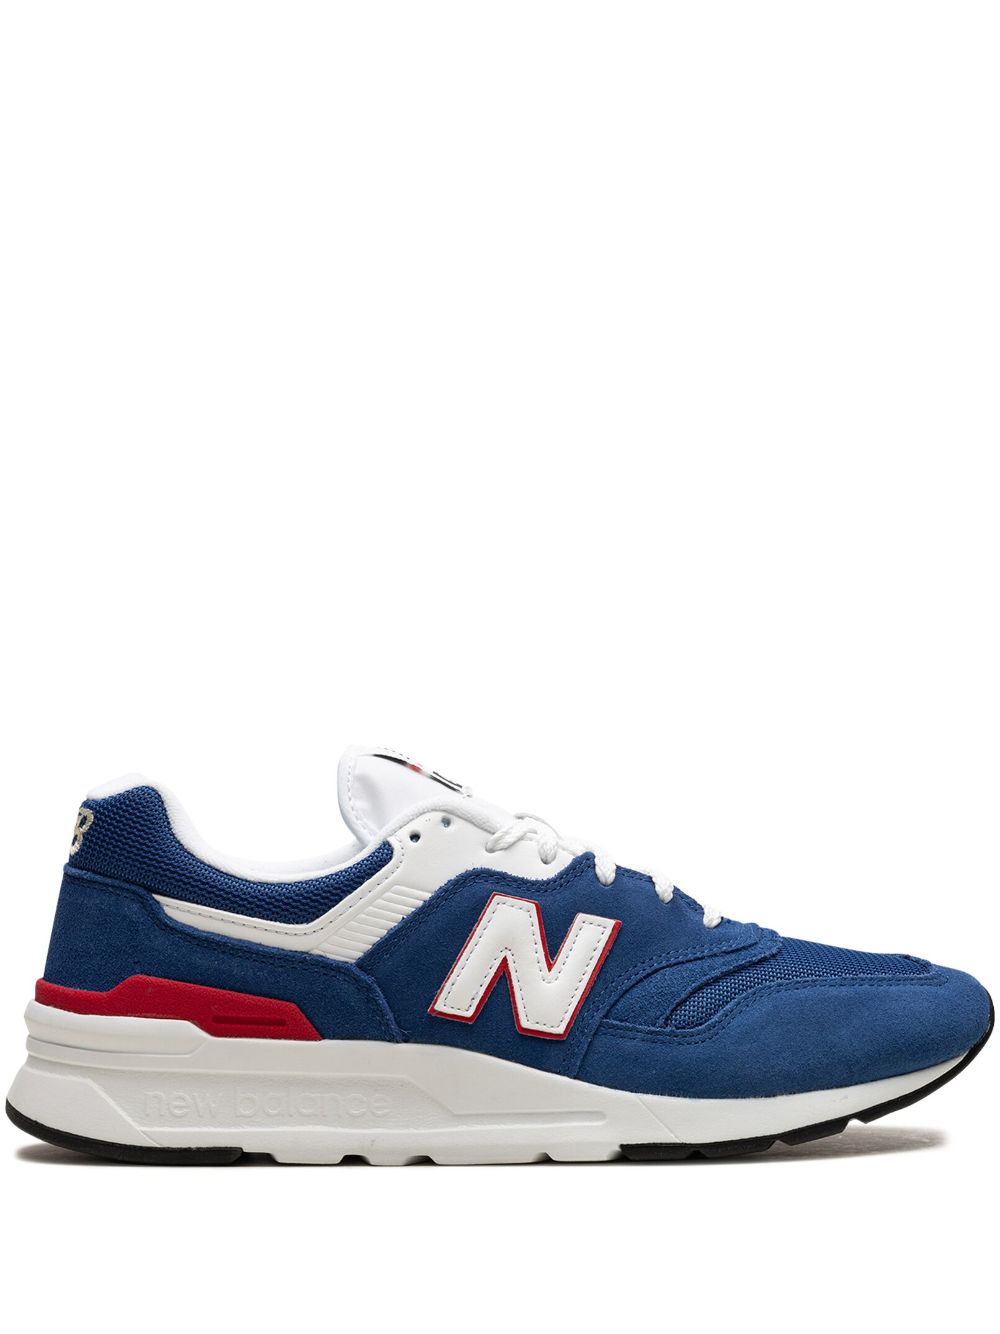 New Balance 997 "Royal" low-top sneakers - Blue